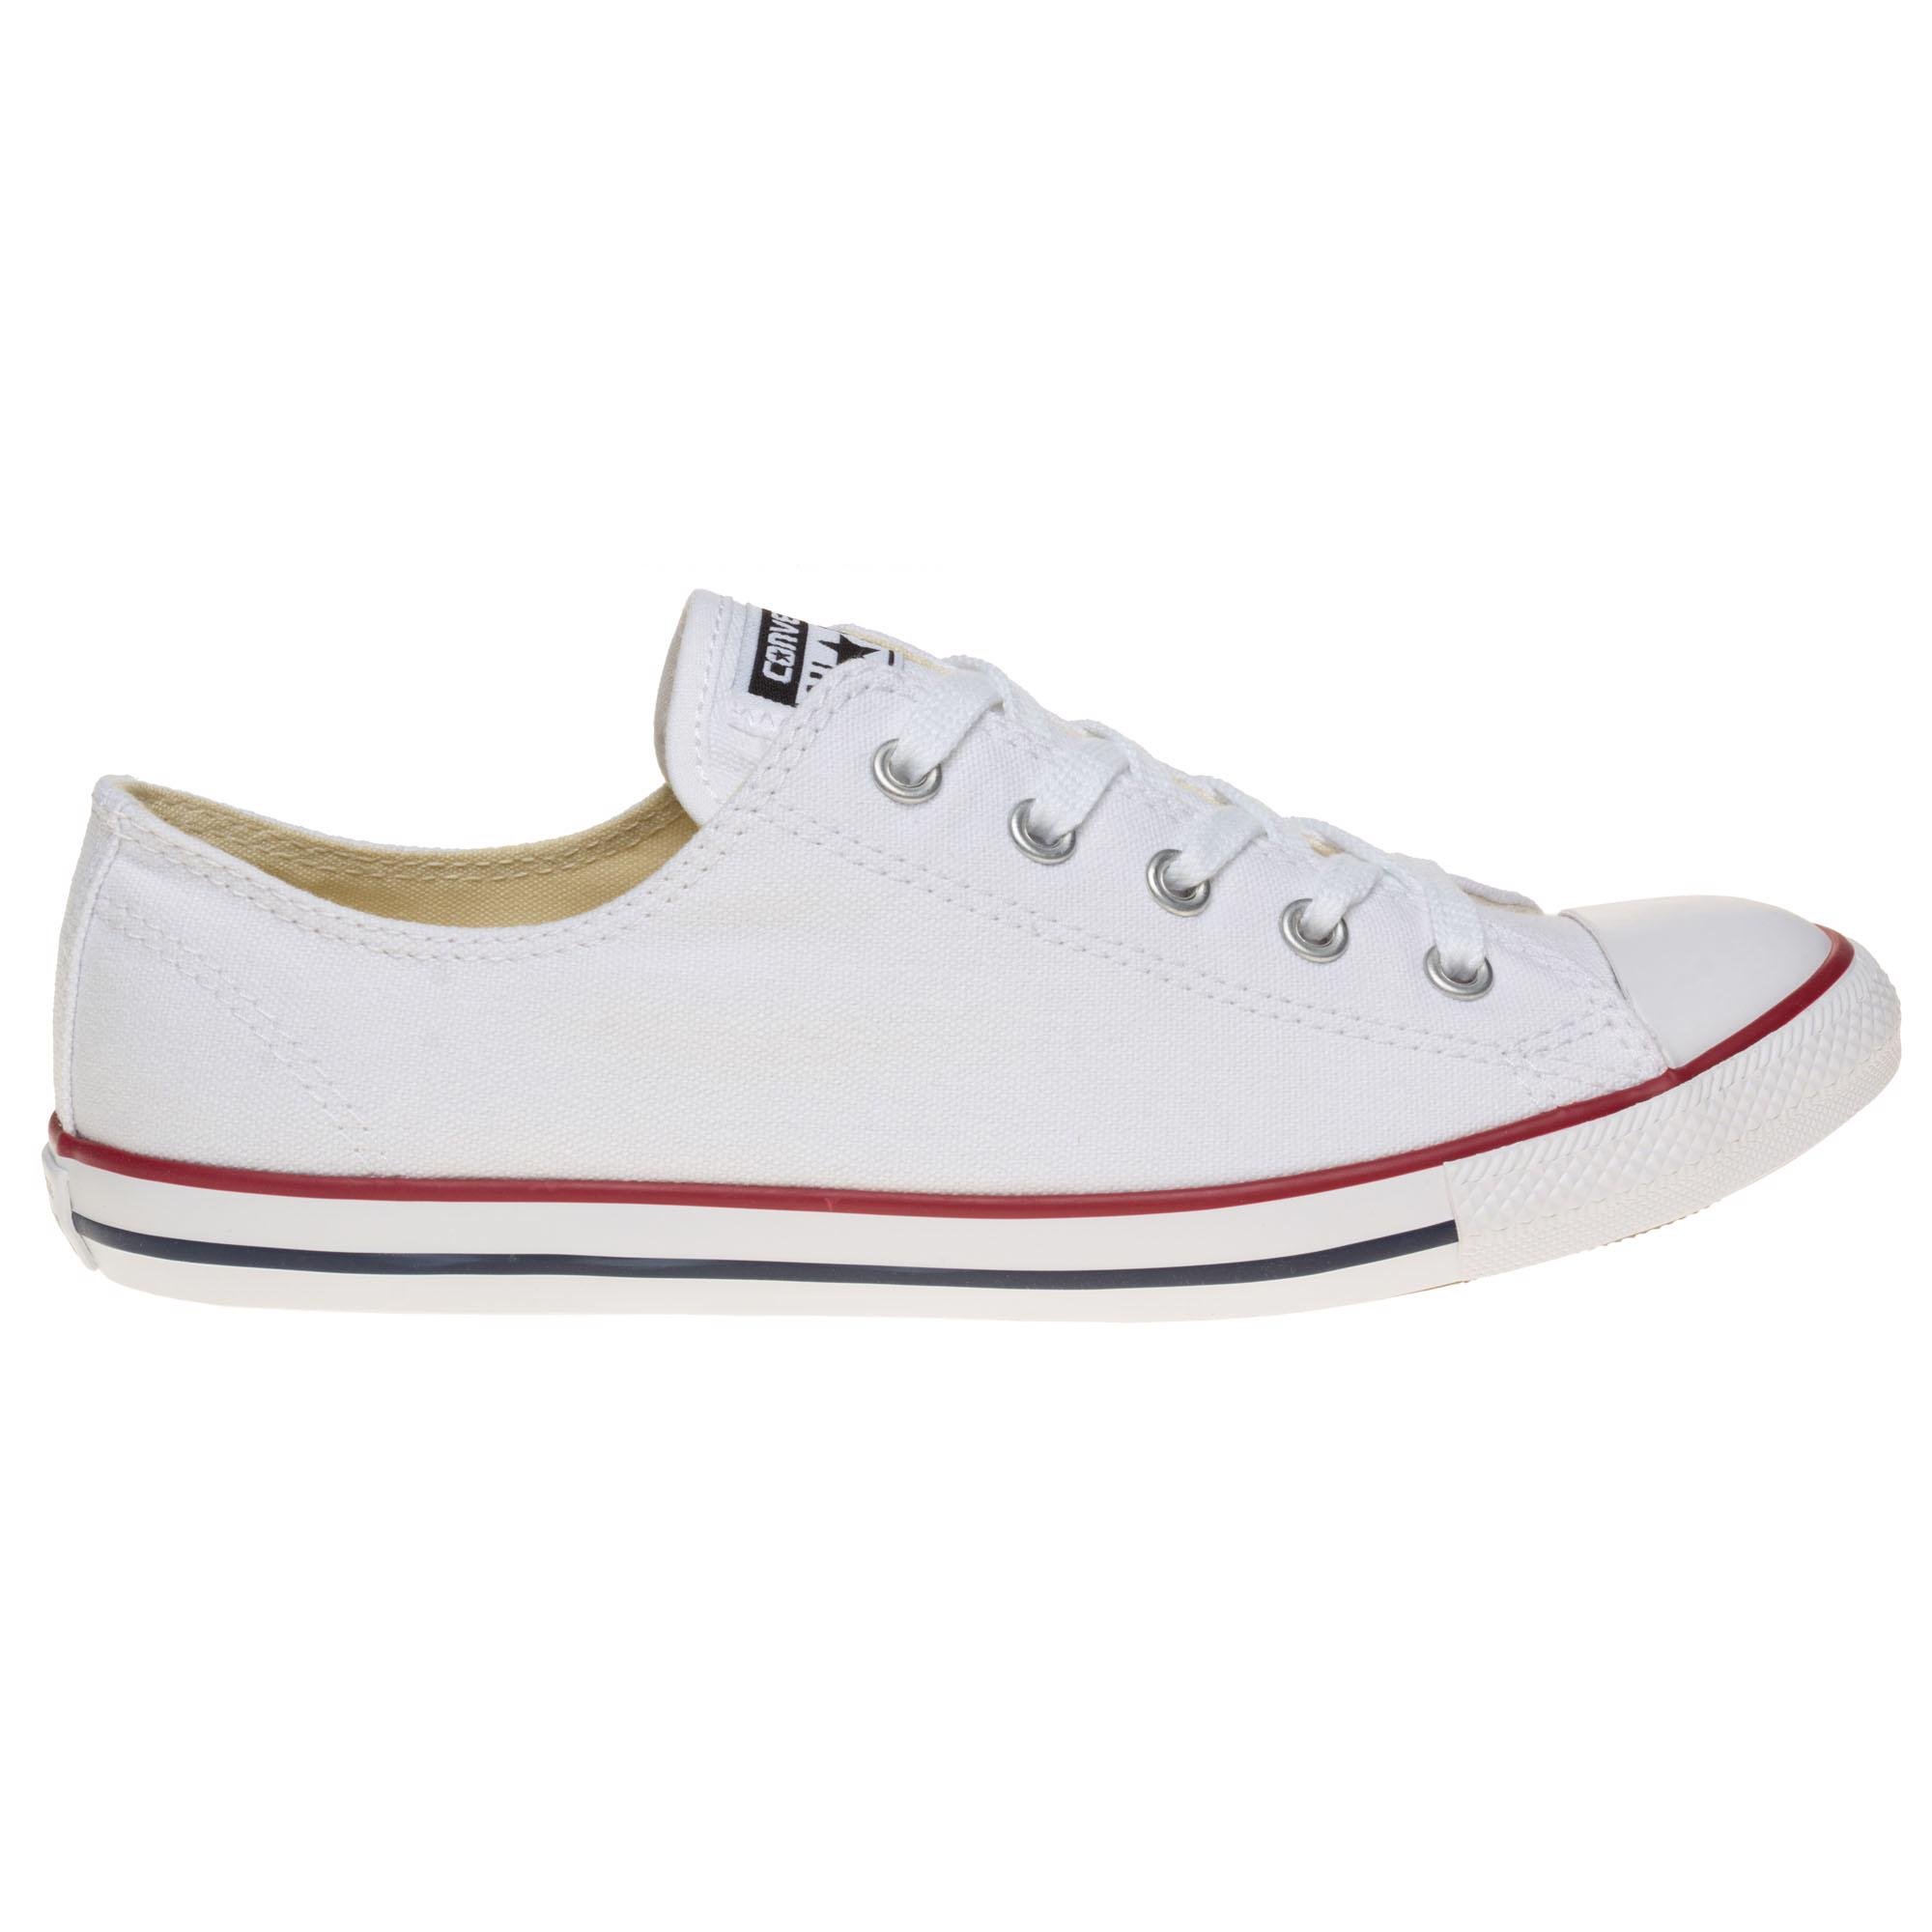 plate Oxidize Ultimate Womens optical white Converse All Star Dainty Ox Sneaker | Soletrader